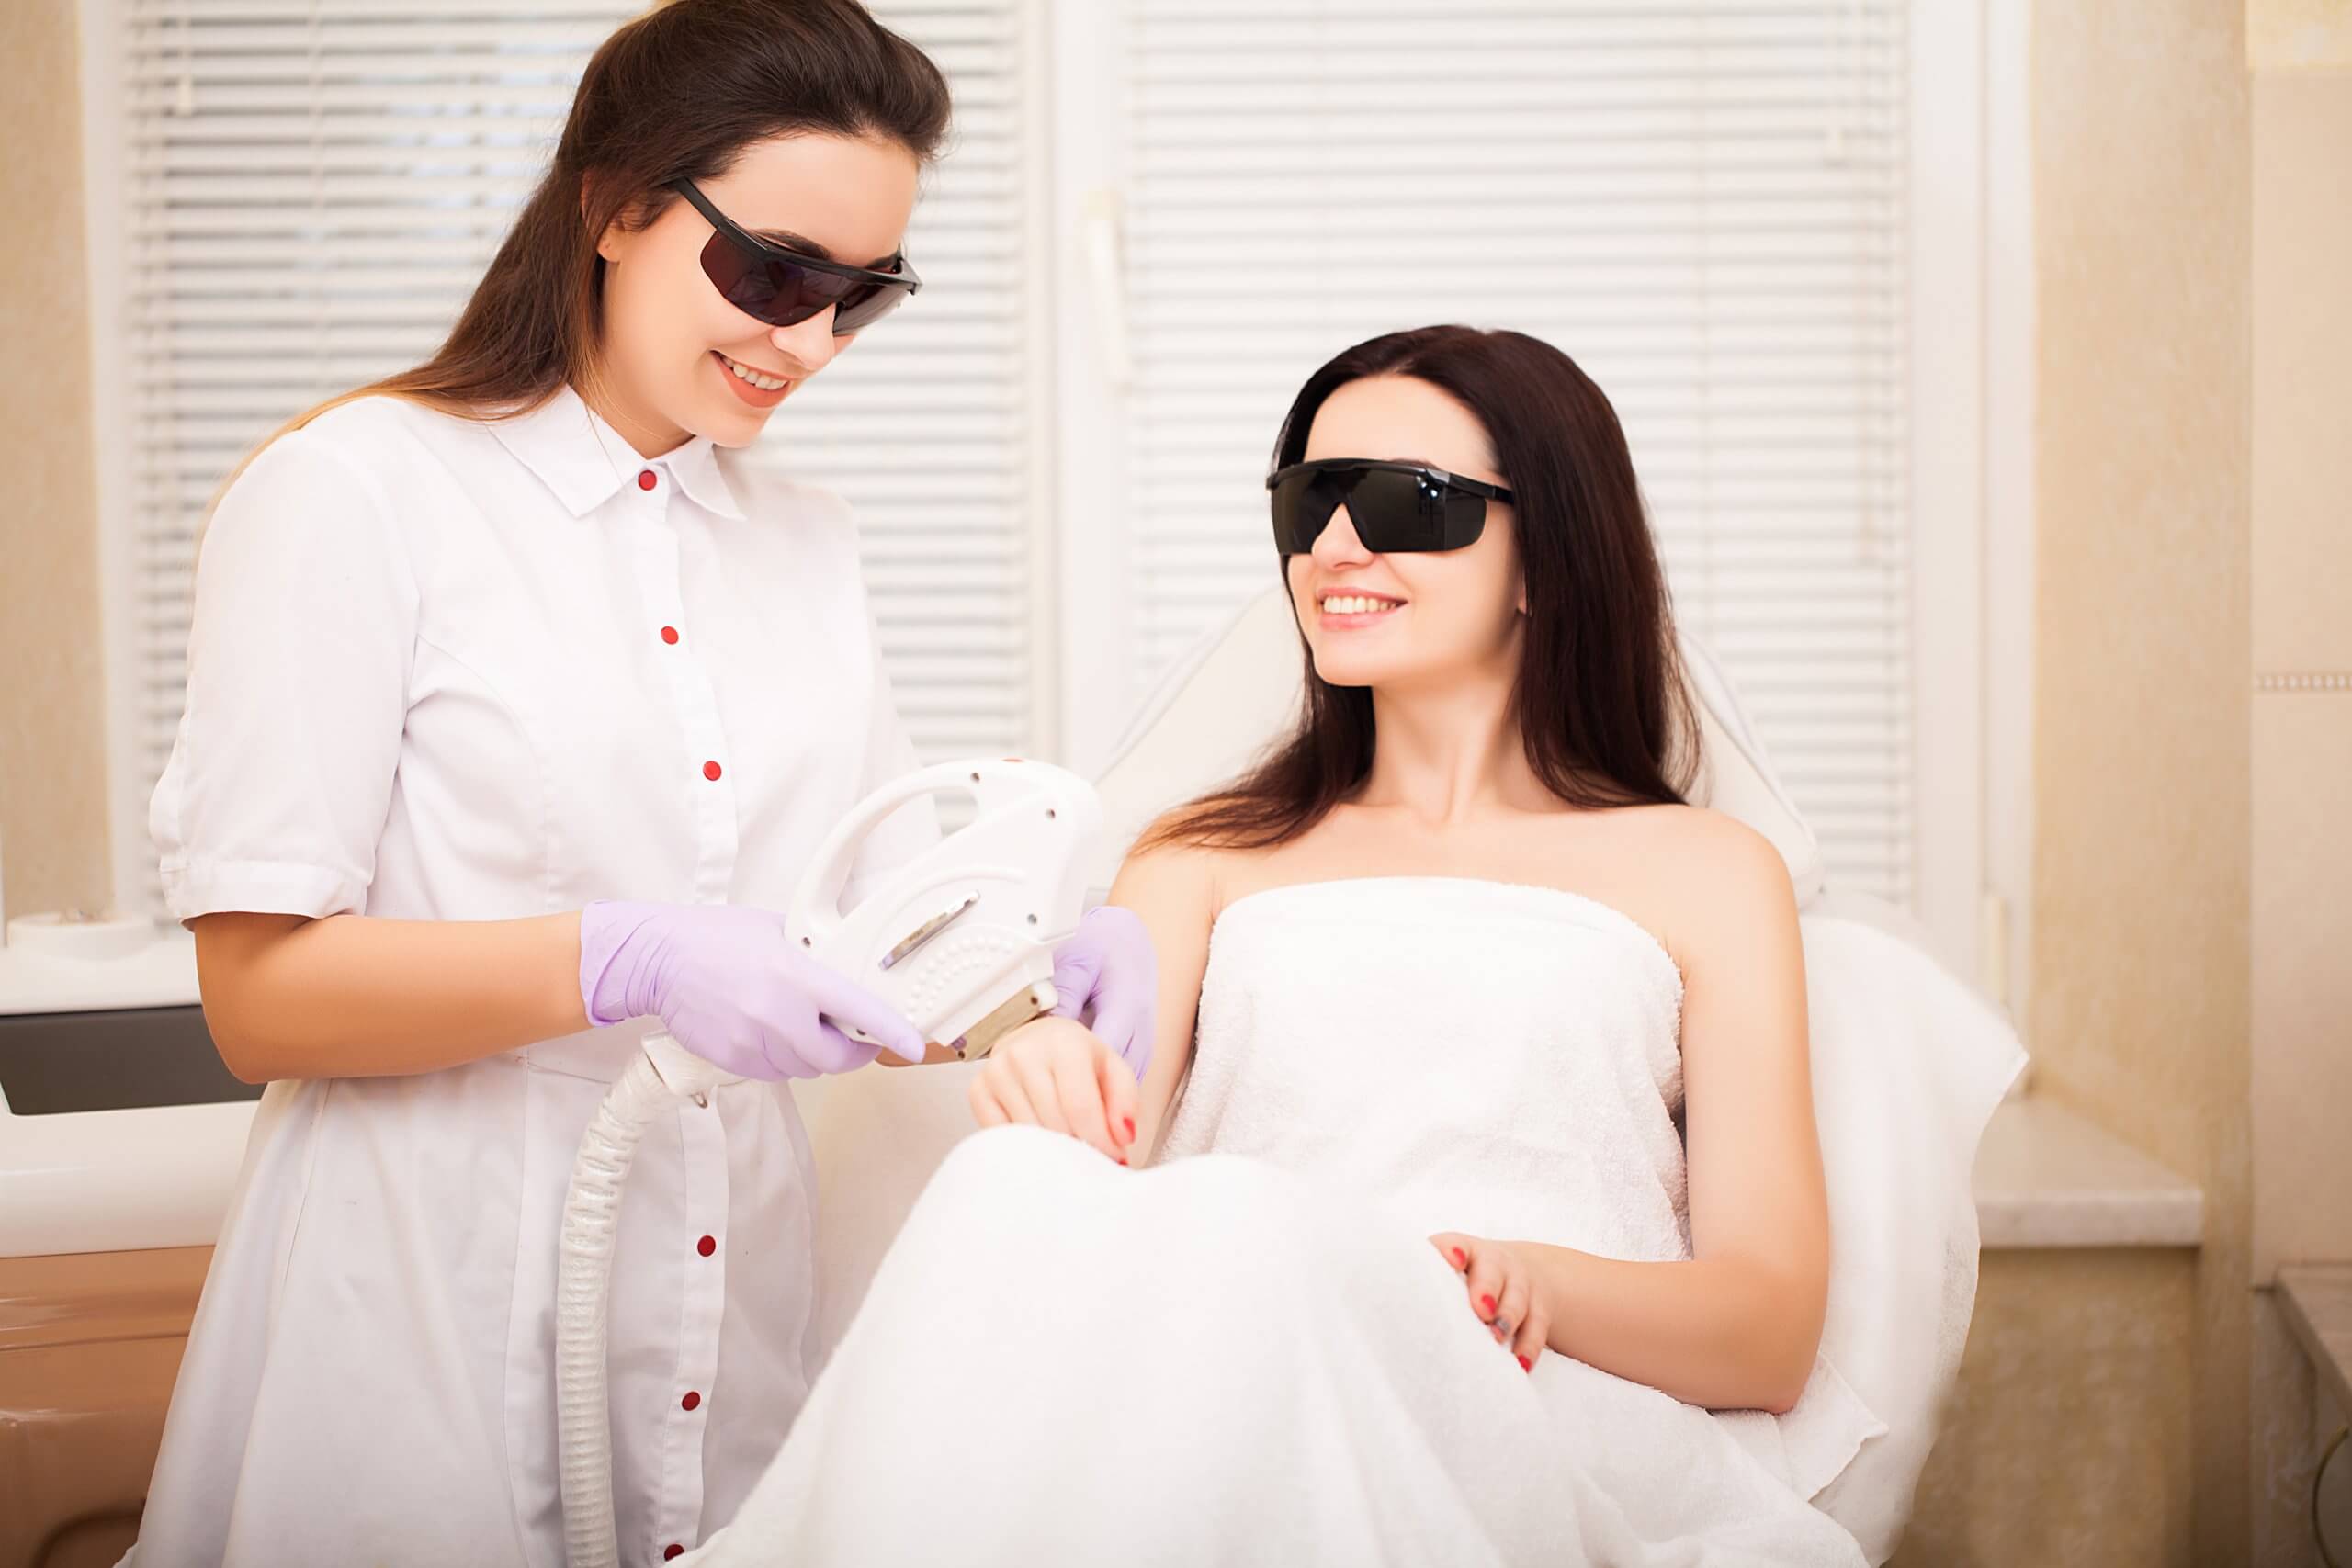 woman receiving a cosmetic laser treatment from a possible career changer to a cosmetic laser technician career.